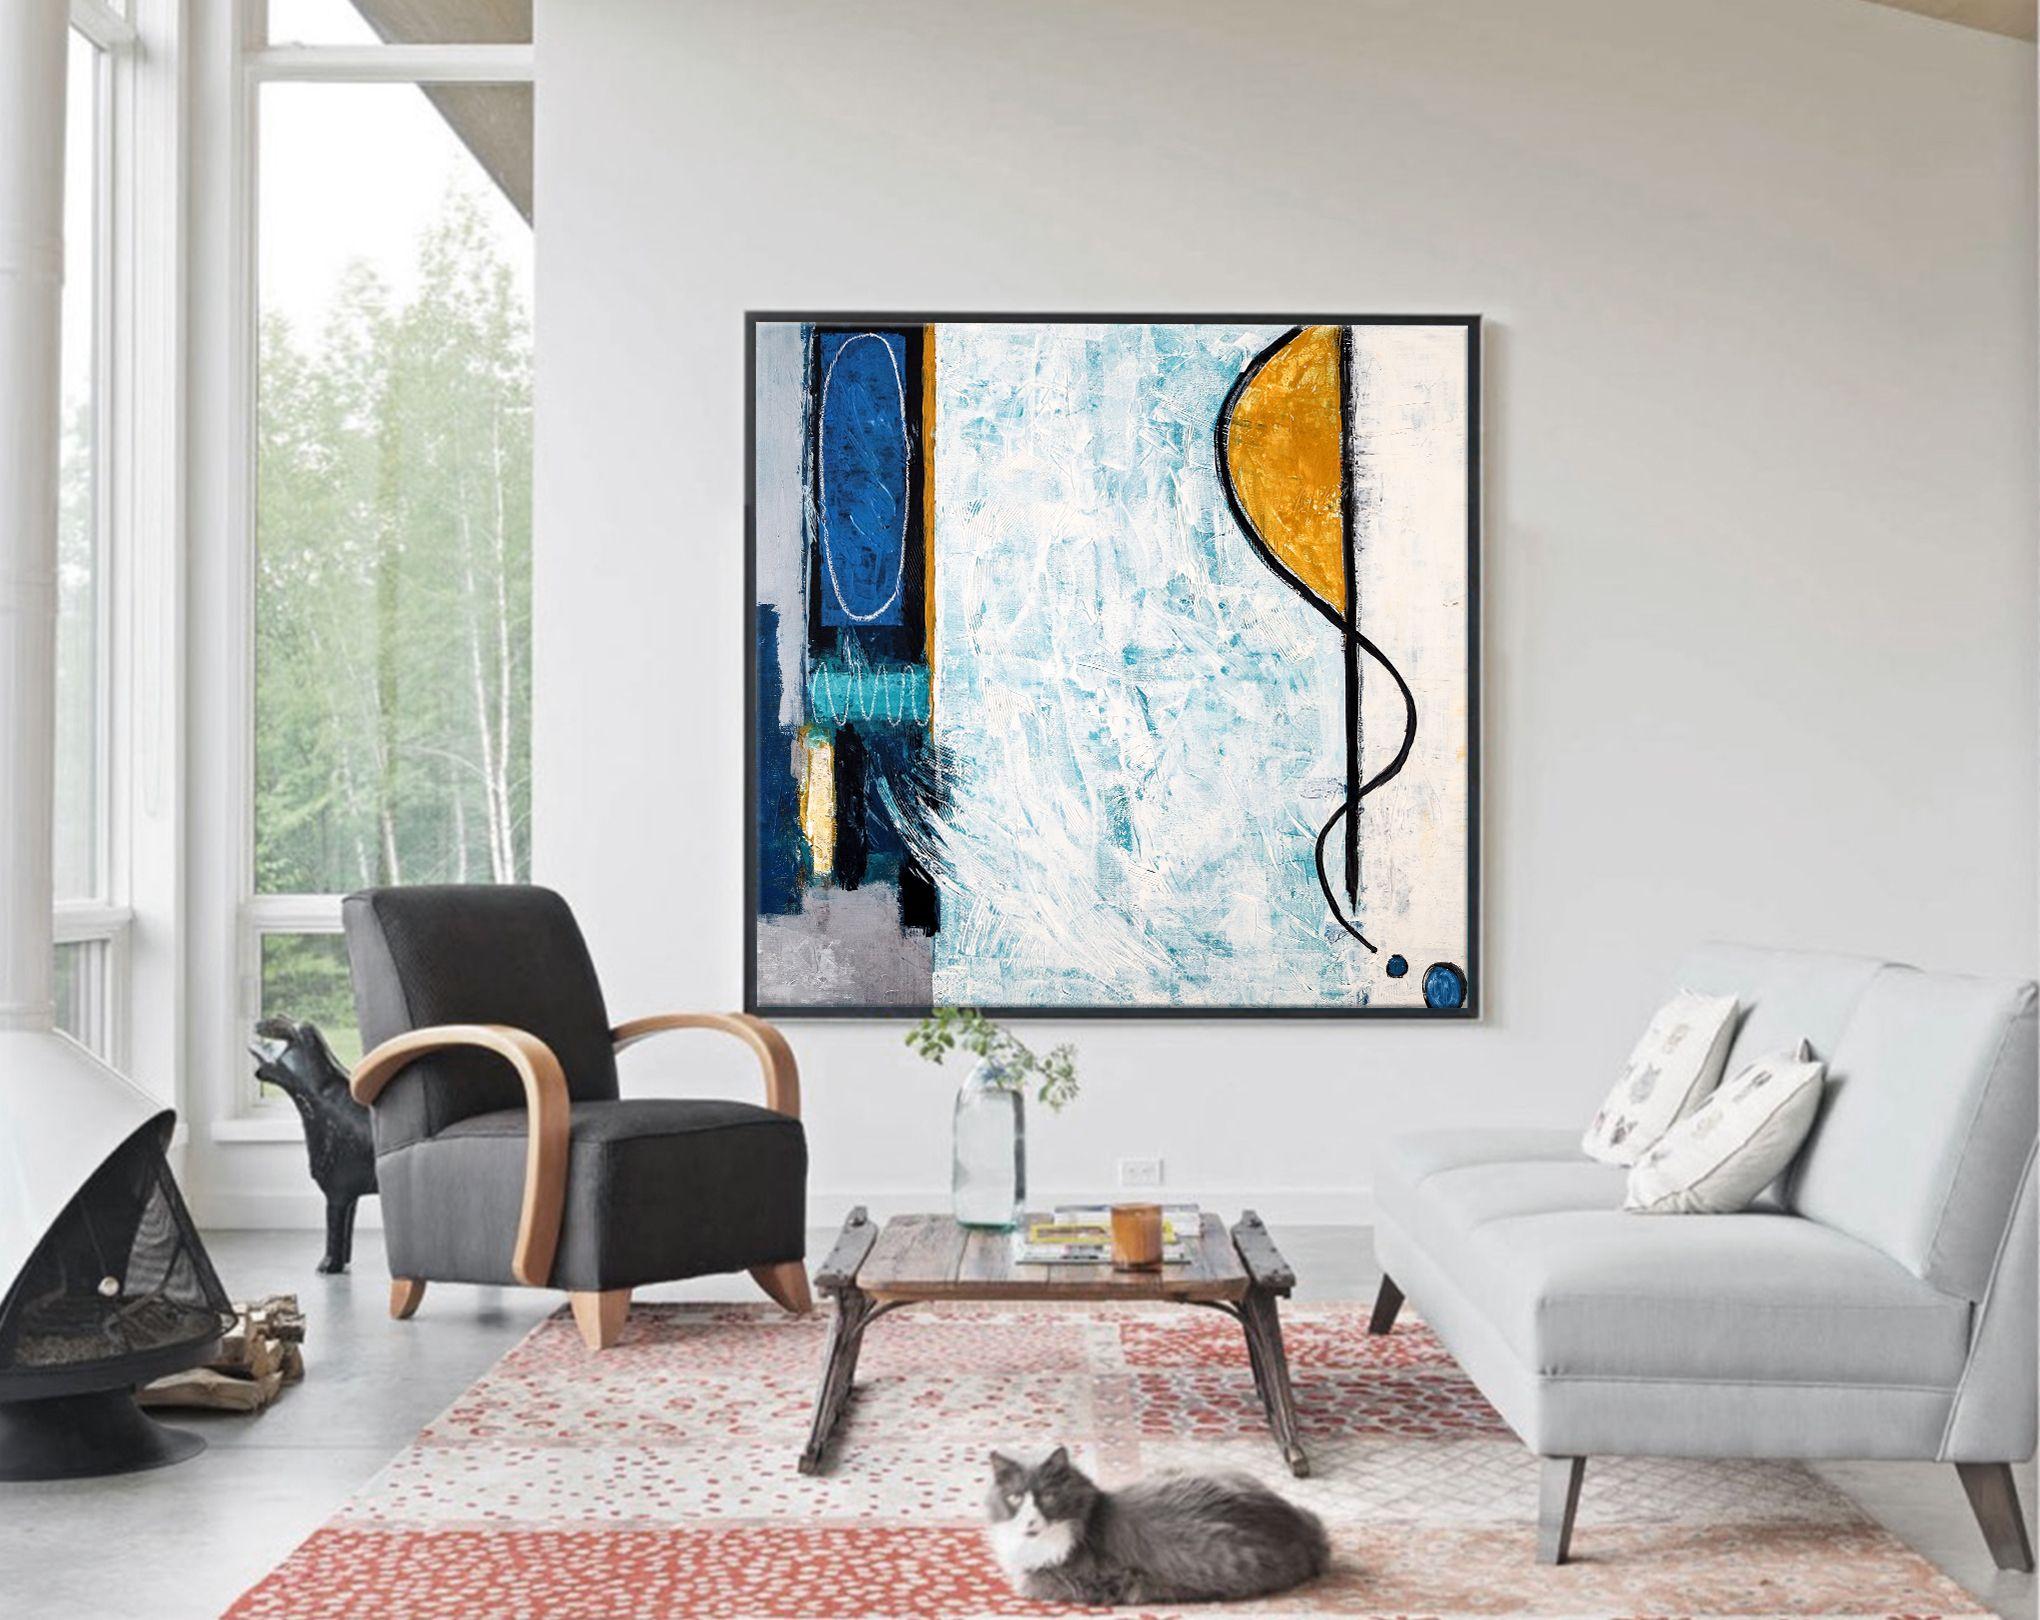 This painting depicts a pool in contemporary and modern style. â€¢ PICTURE HANGER ATTACHED: Yes â€¢ SIDES PAINTED: Yes â€¢ READY TO HANG: No (Rolled in tube) â€¢ ARTIST SIGNED: Yes â€¢ CERTIFICATE OF AUTHENTICITY: Yes, This is an Original Painting